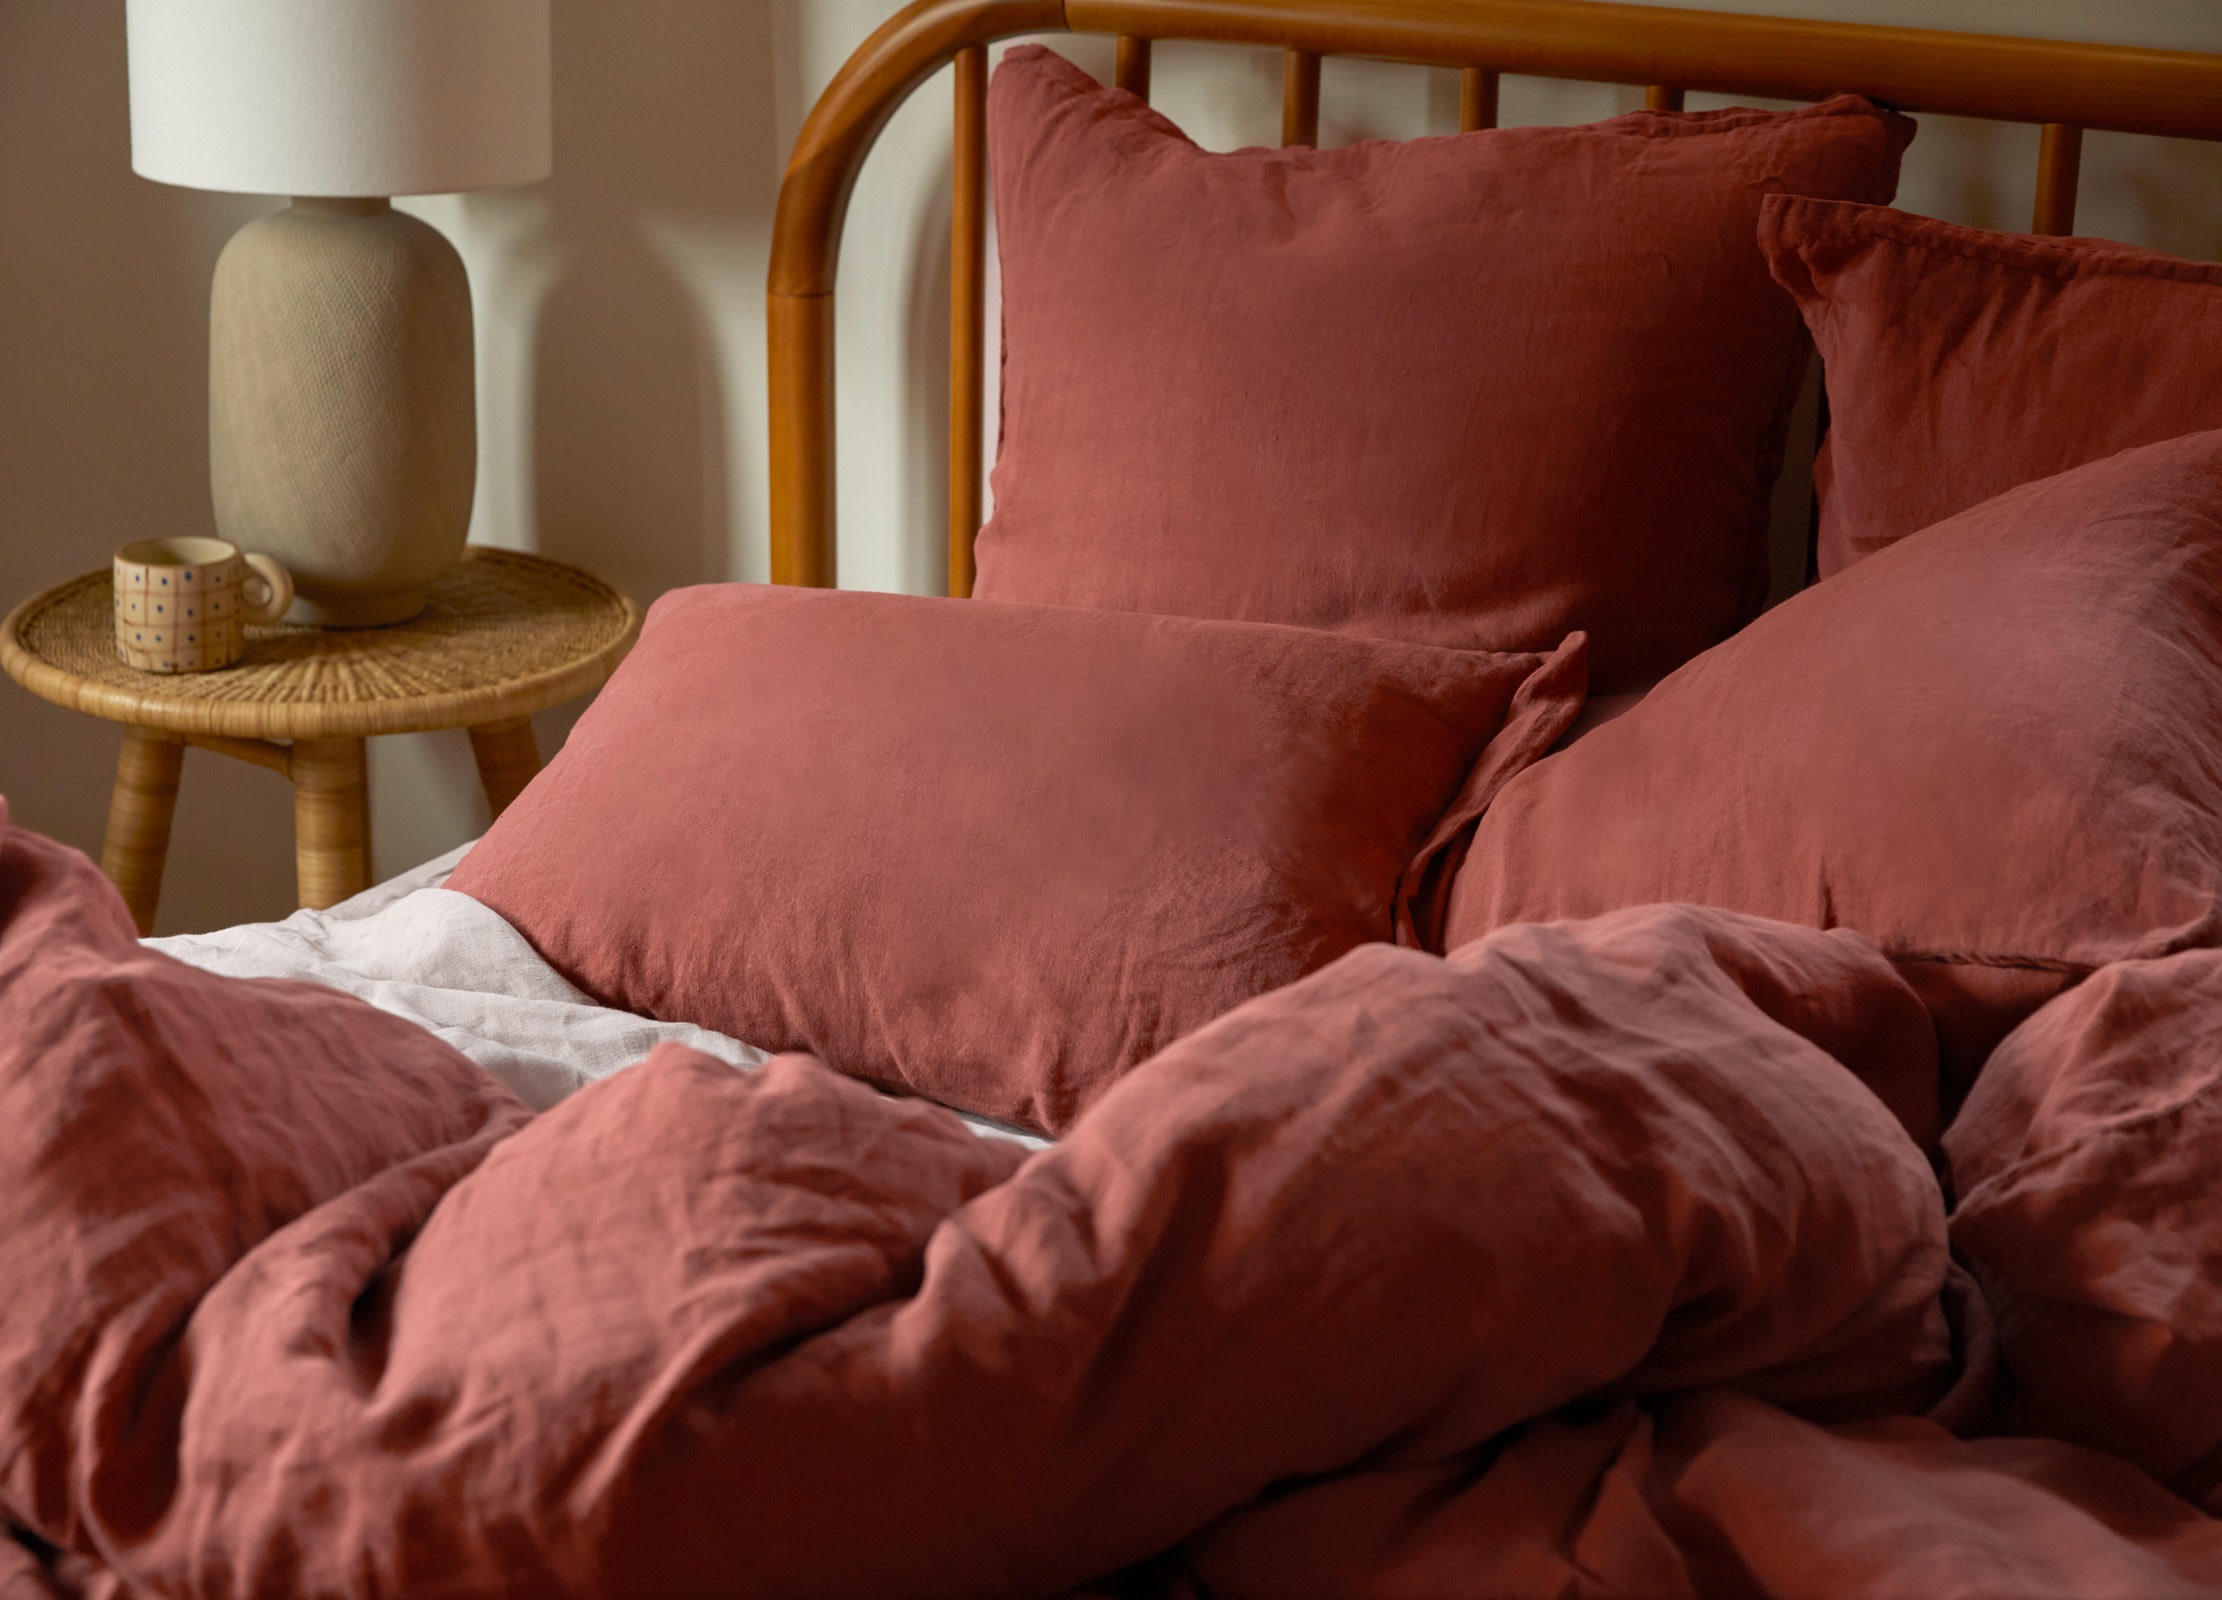 A bed with canyon-red linen sheets